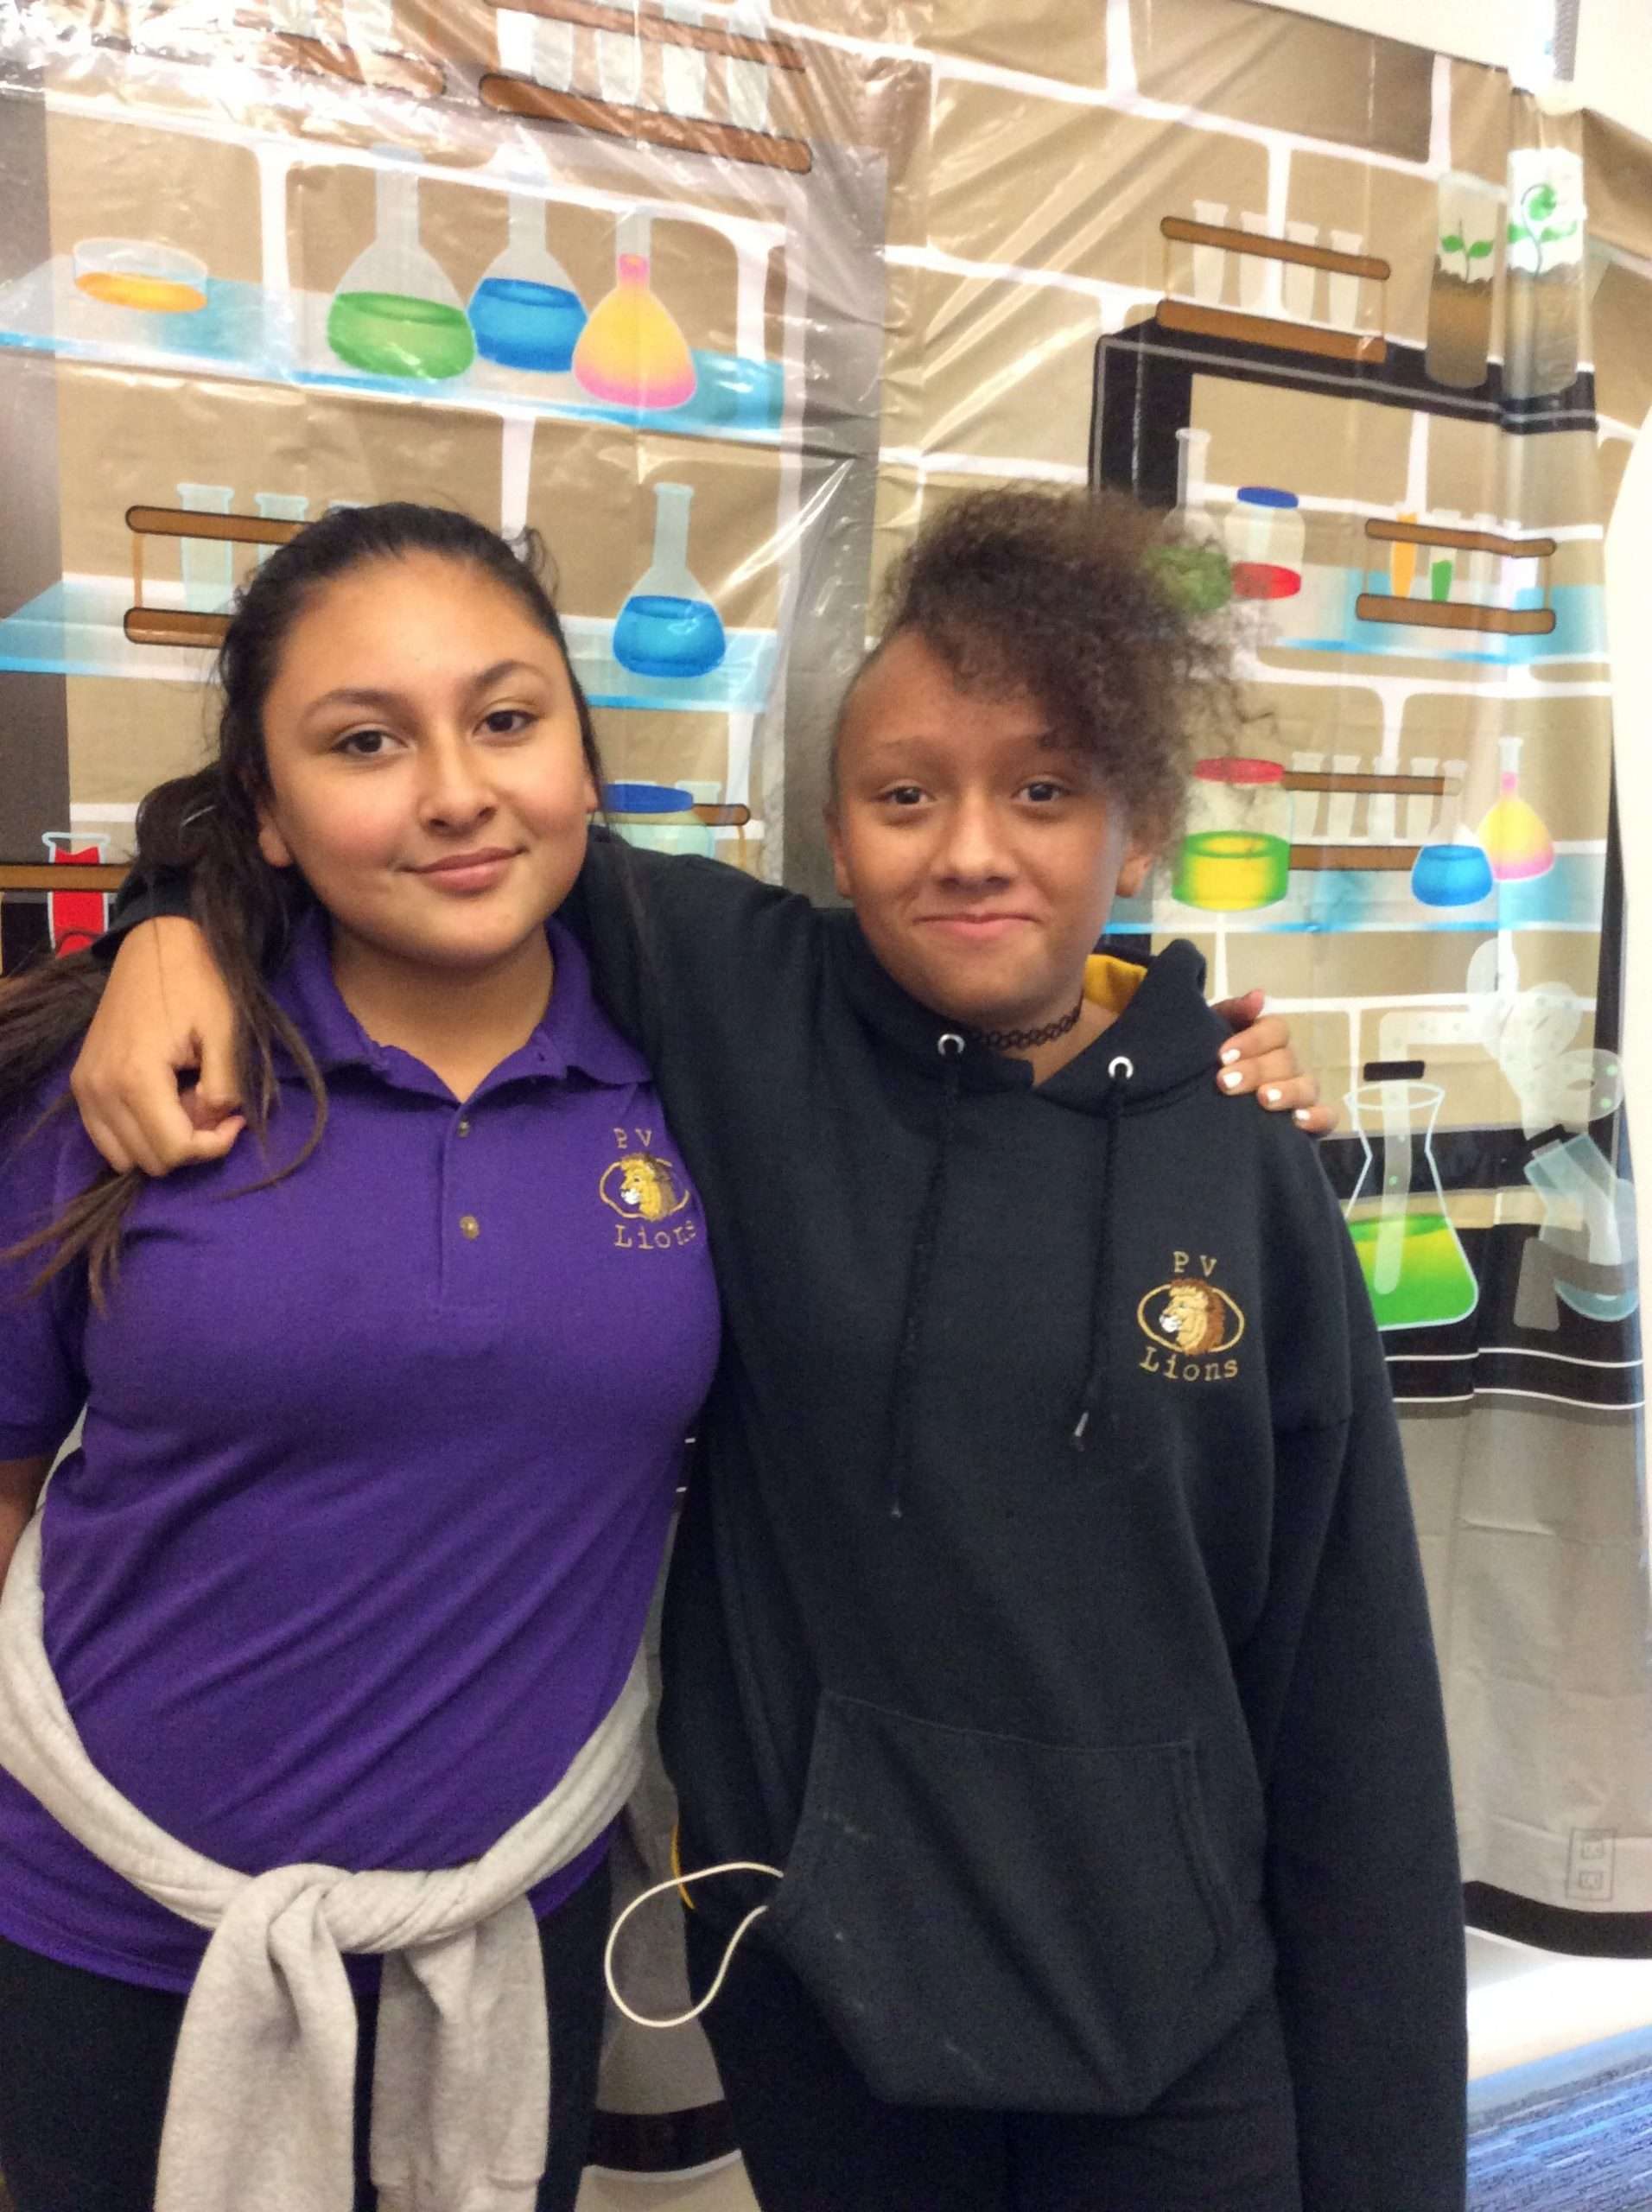 Two attendees at "Bring your friend to Teen Science Café night.